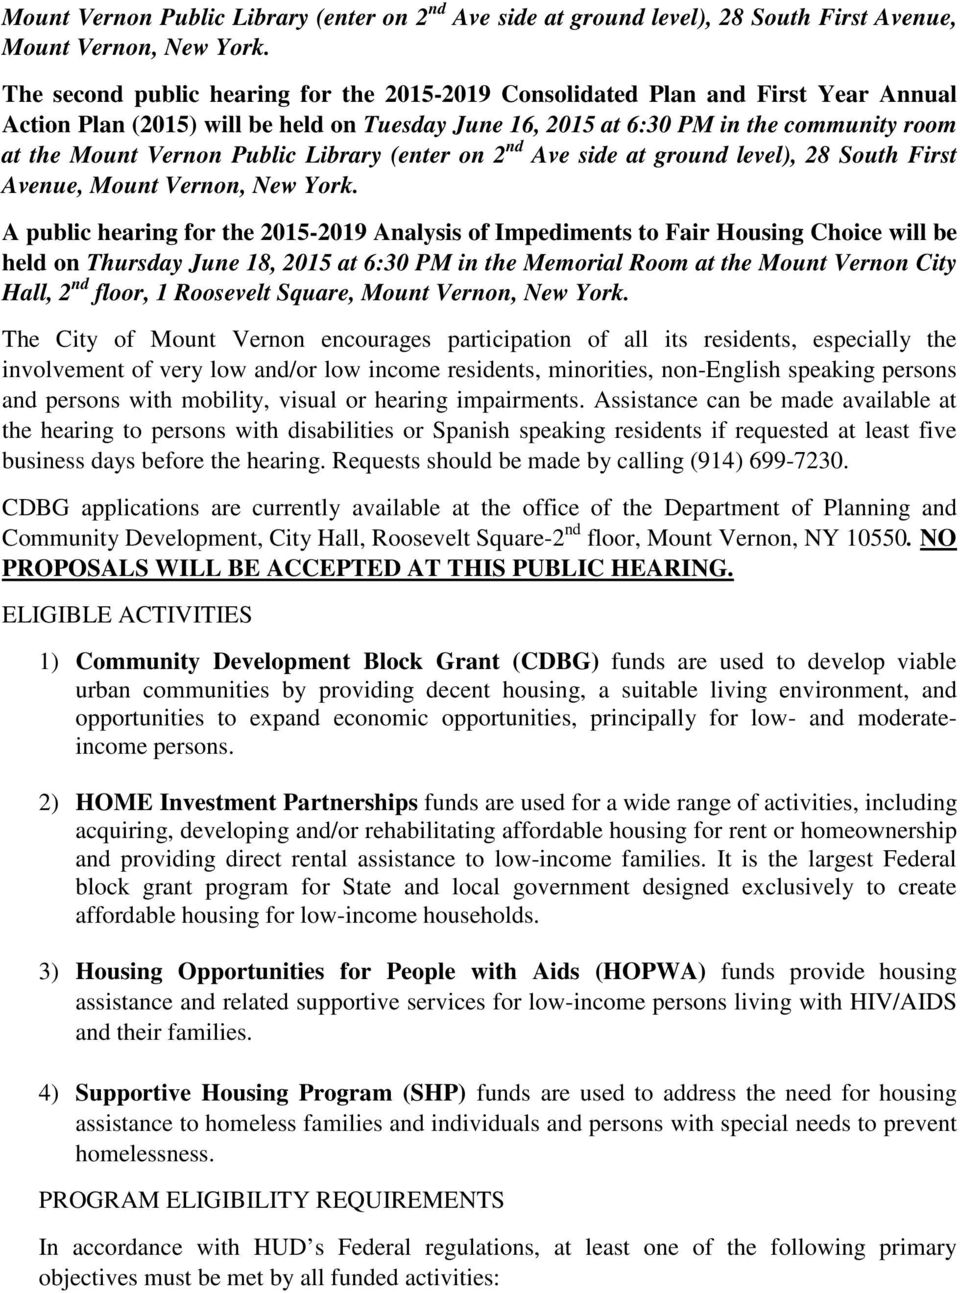 for the 2015-2019 Analysis of Impediments to Fair Housing Choice will be held on Thursday June 18, 2015 at 6:30 PM in the Memorial Room at the Mount Vernon City Hall, 2 nd floor, 1 Roosevelt Square,